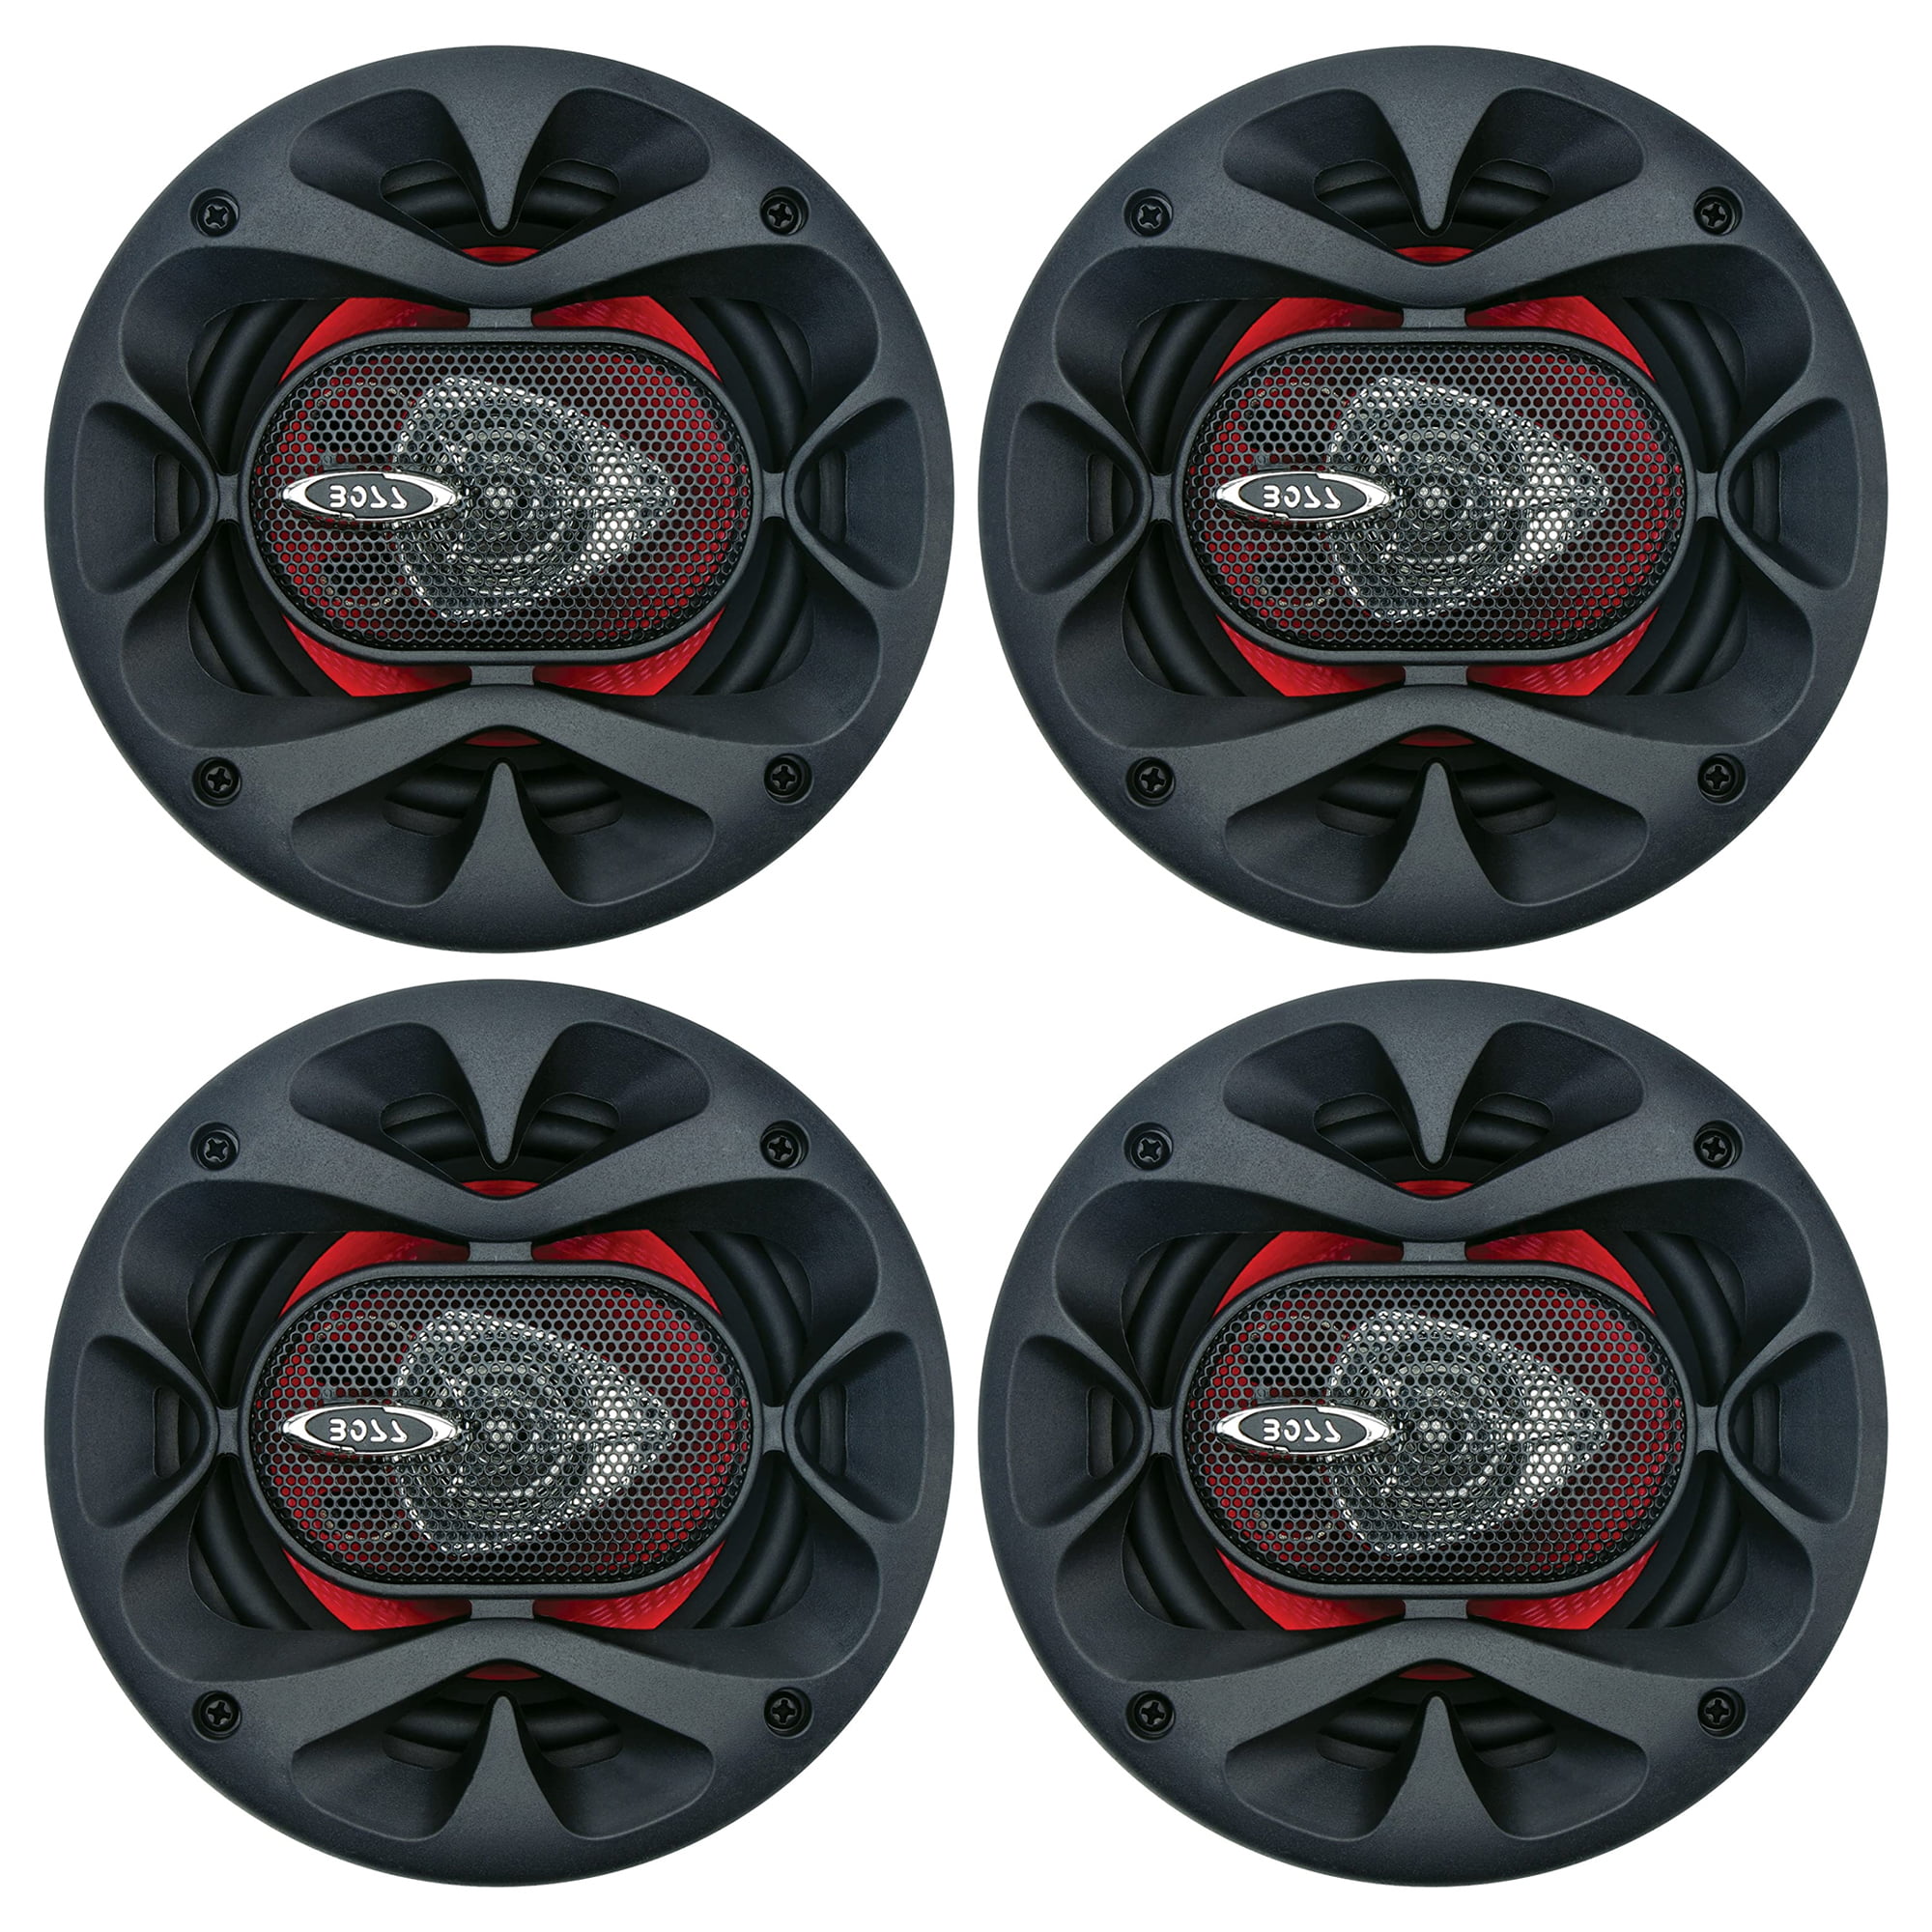 New BOSS CH5520 CHAOS EXXTREME 200W 5-1/4" 5.25" 2-Way Car Audio Speakers Pair 